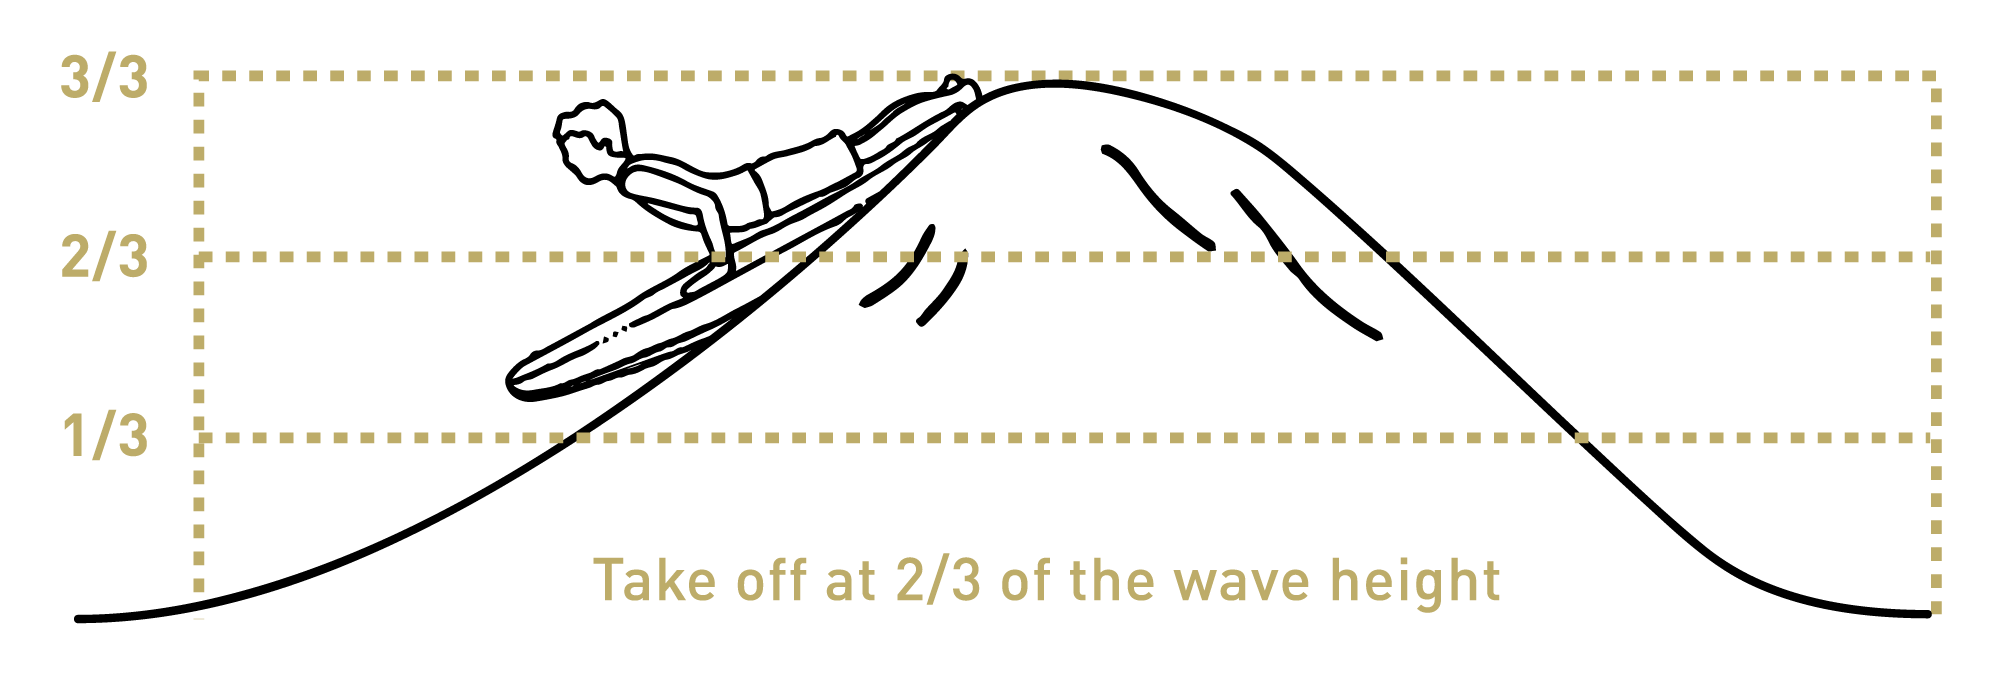 Illustration Wave Height Take Off